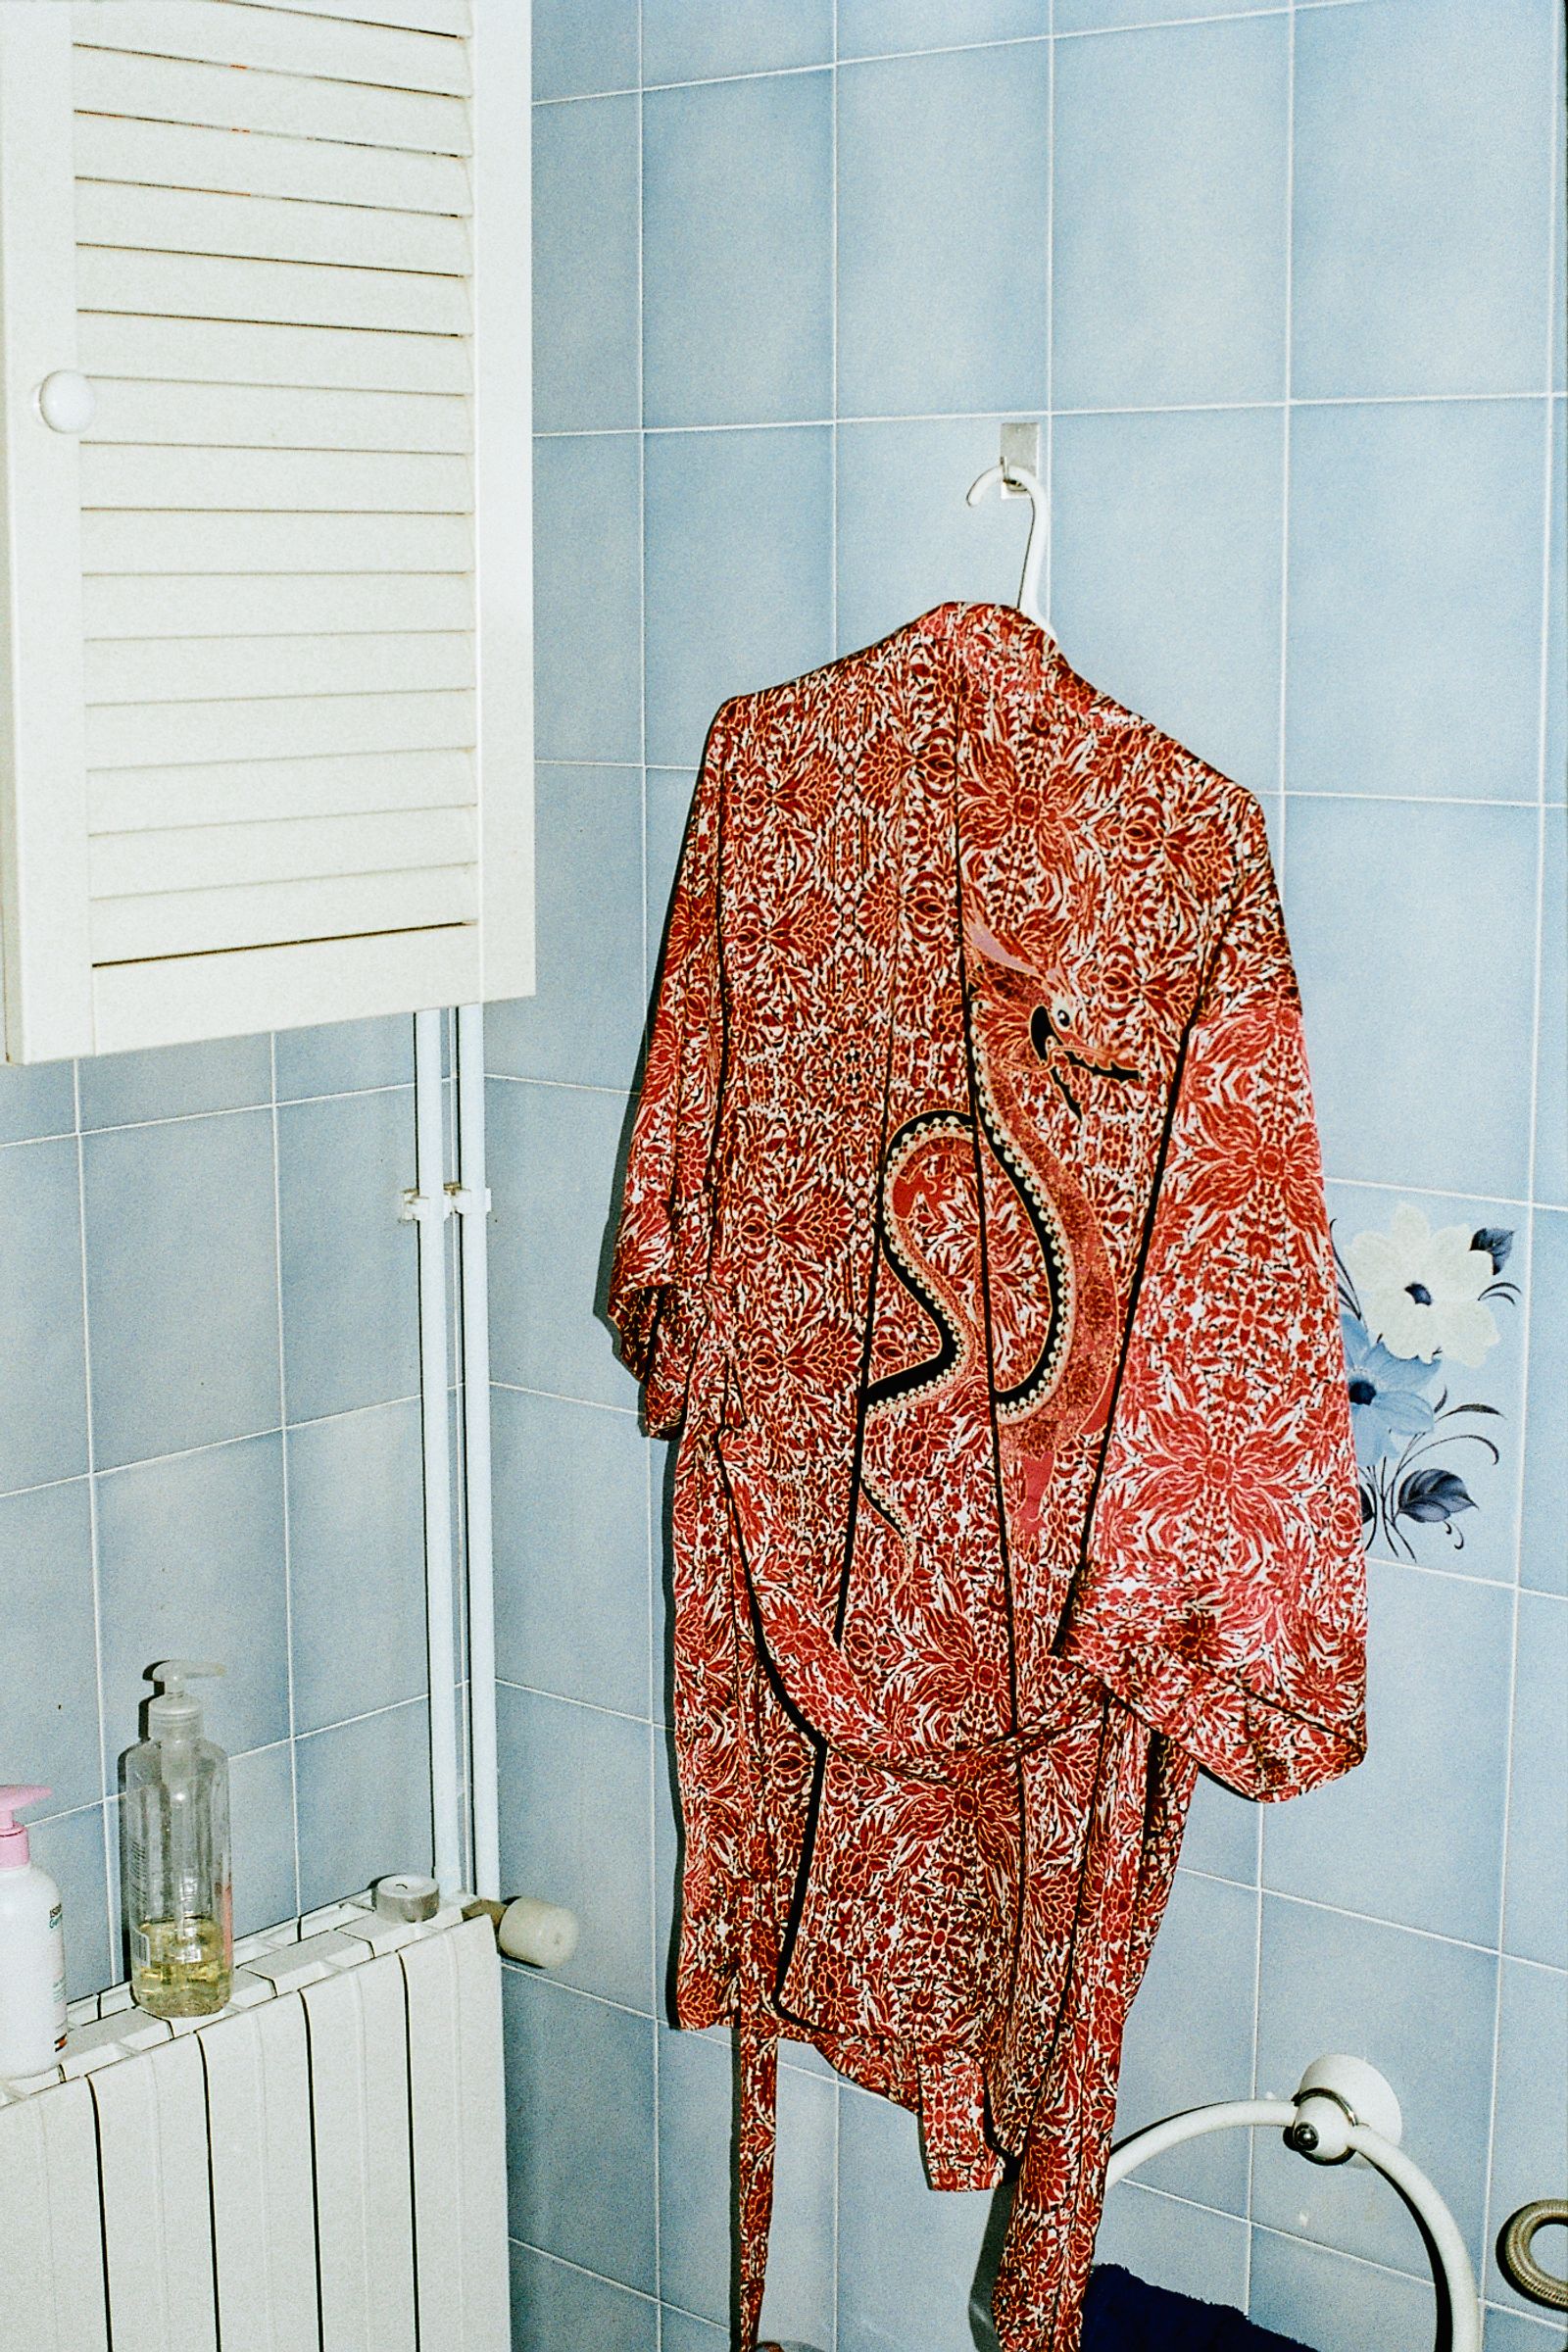 © Mercedes Cosco - Image from the How to live with the things I can't control photography project